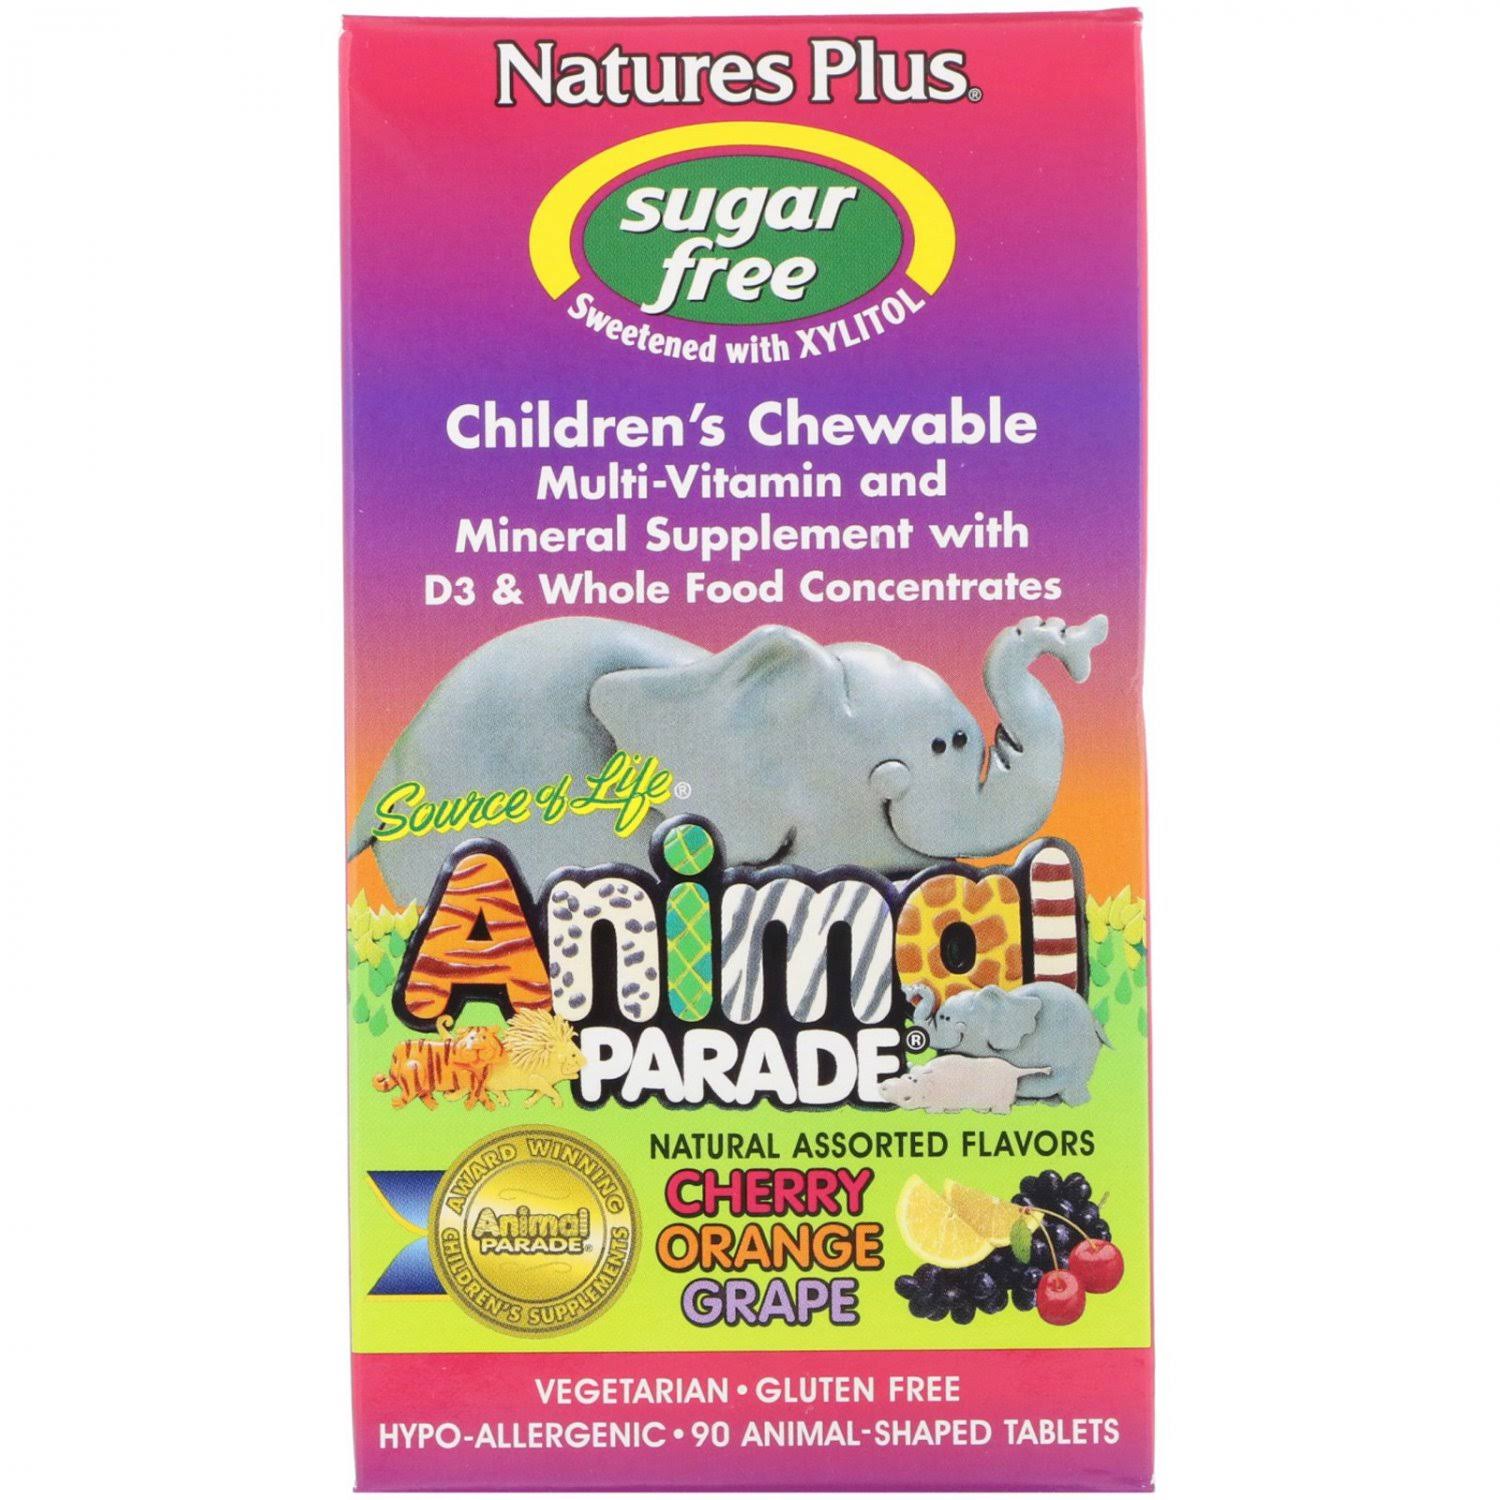 Nature's Plus Source of Life Animal Parade Children's Chewable